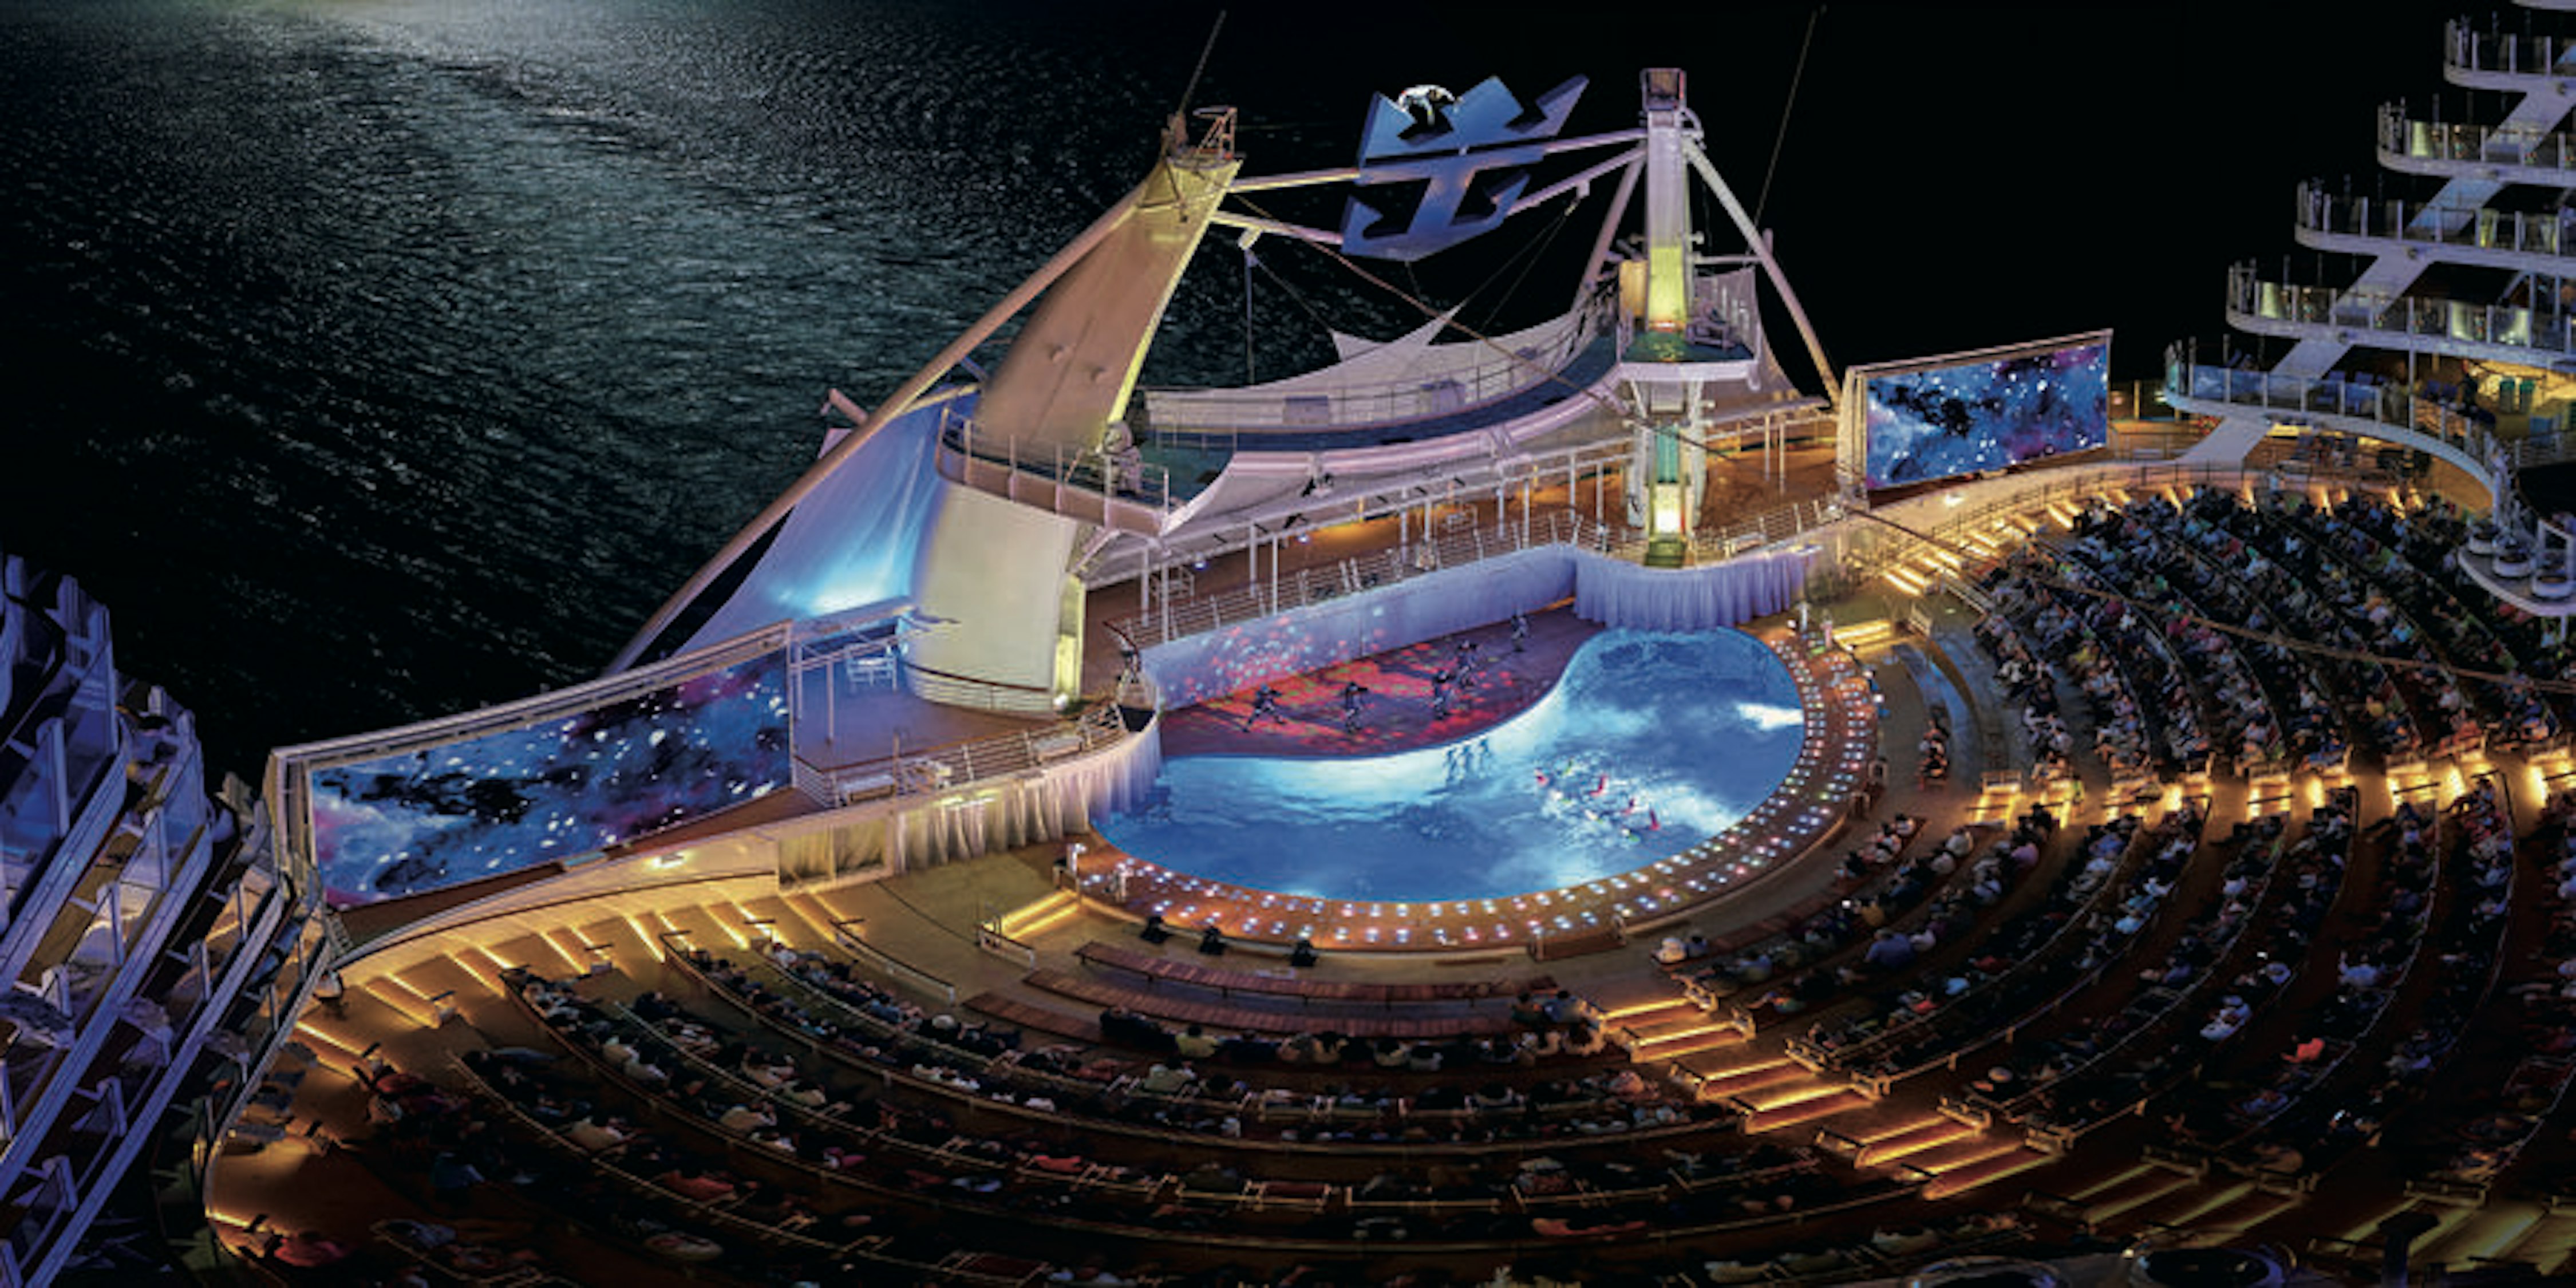 19 Free Things to Do on Royal Caribbean's Oasis-Class Cruise Ships